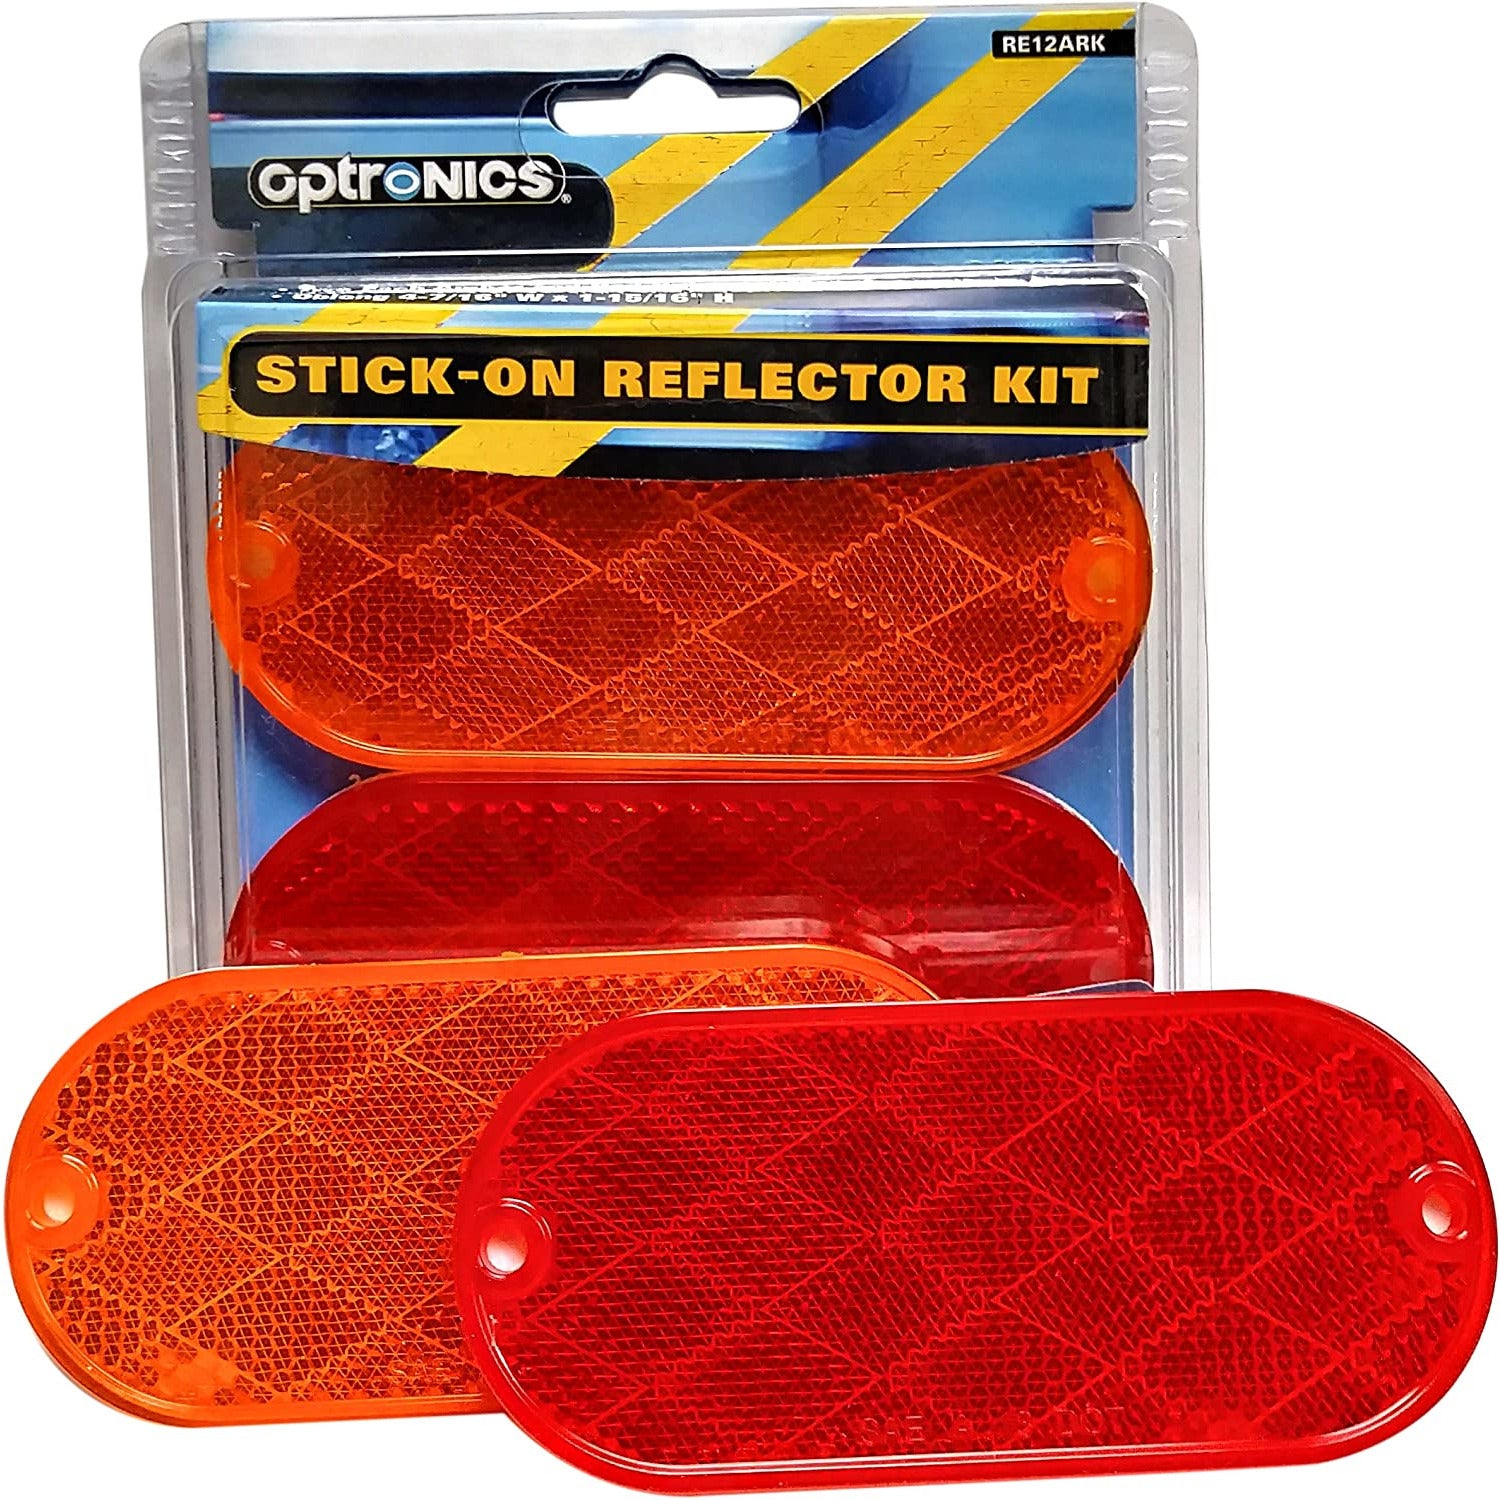 DLT RE12ARK Optronics Reflector Kit (4" Oblong, Red & Amber, Adhesive/Screw, 4pc)